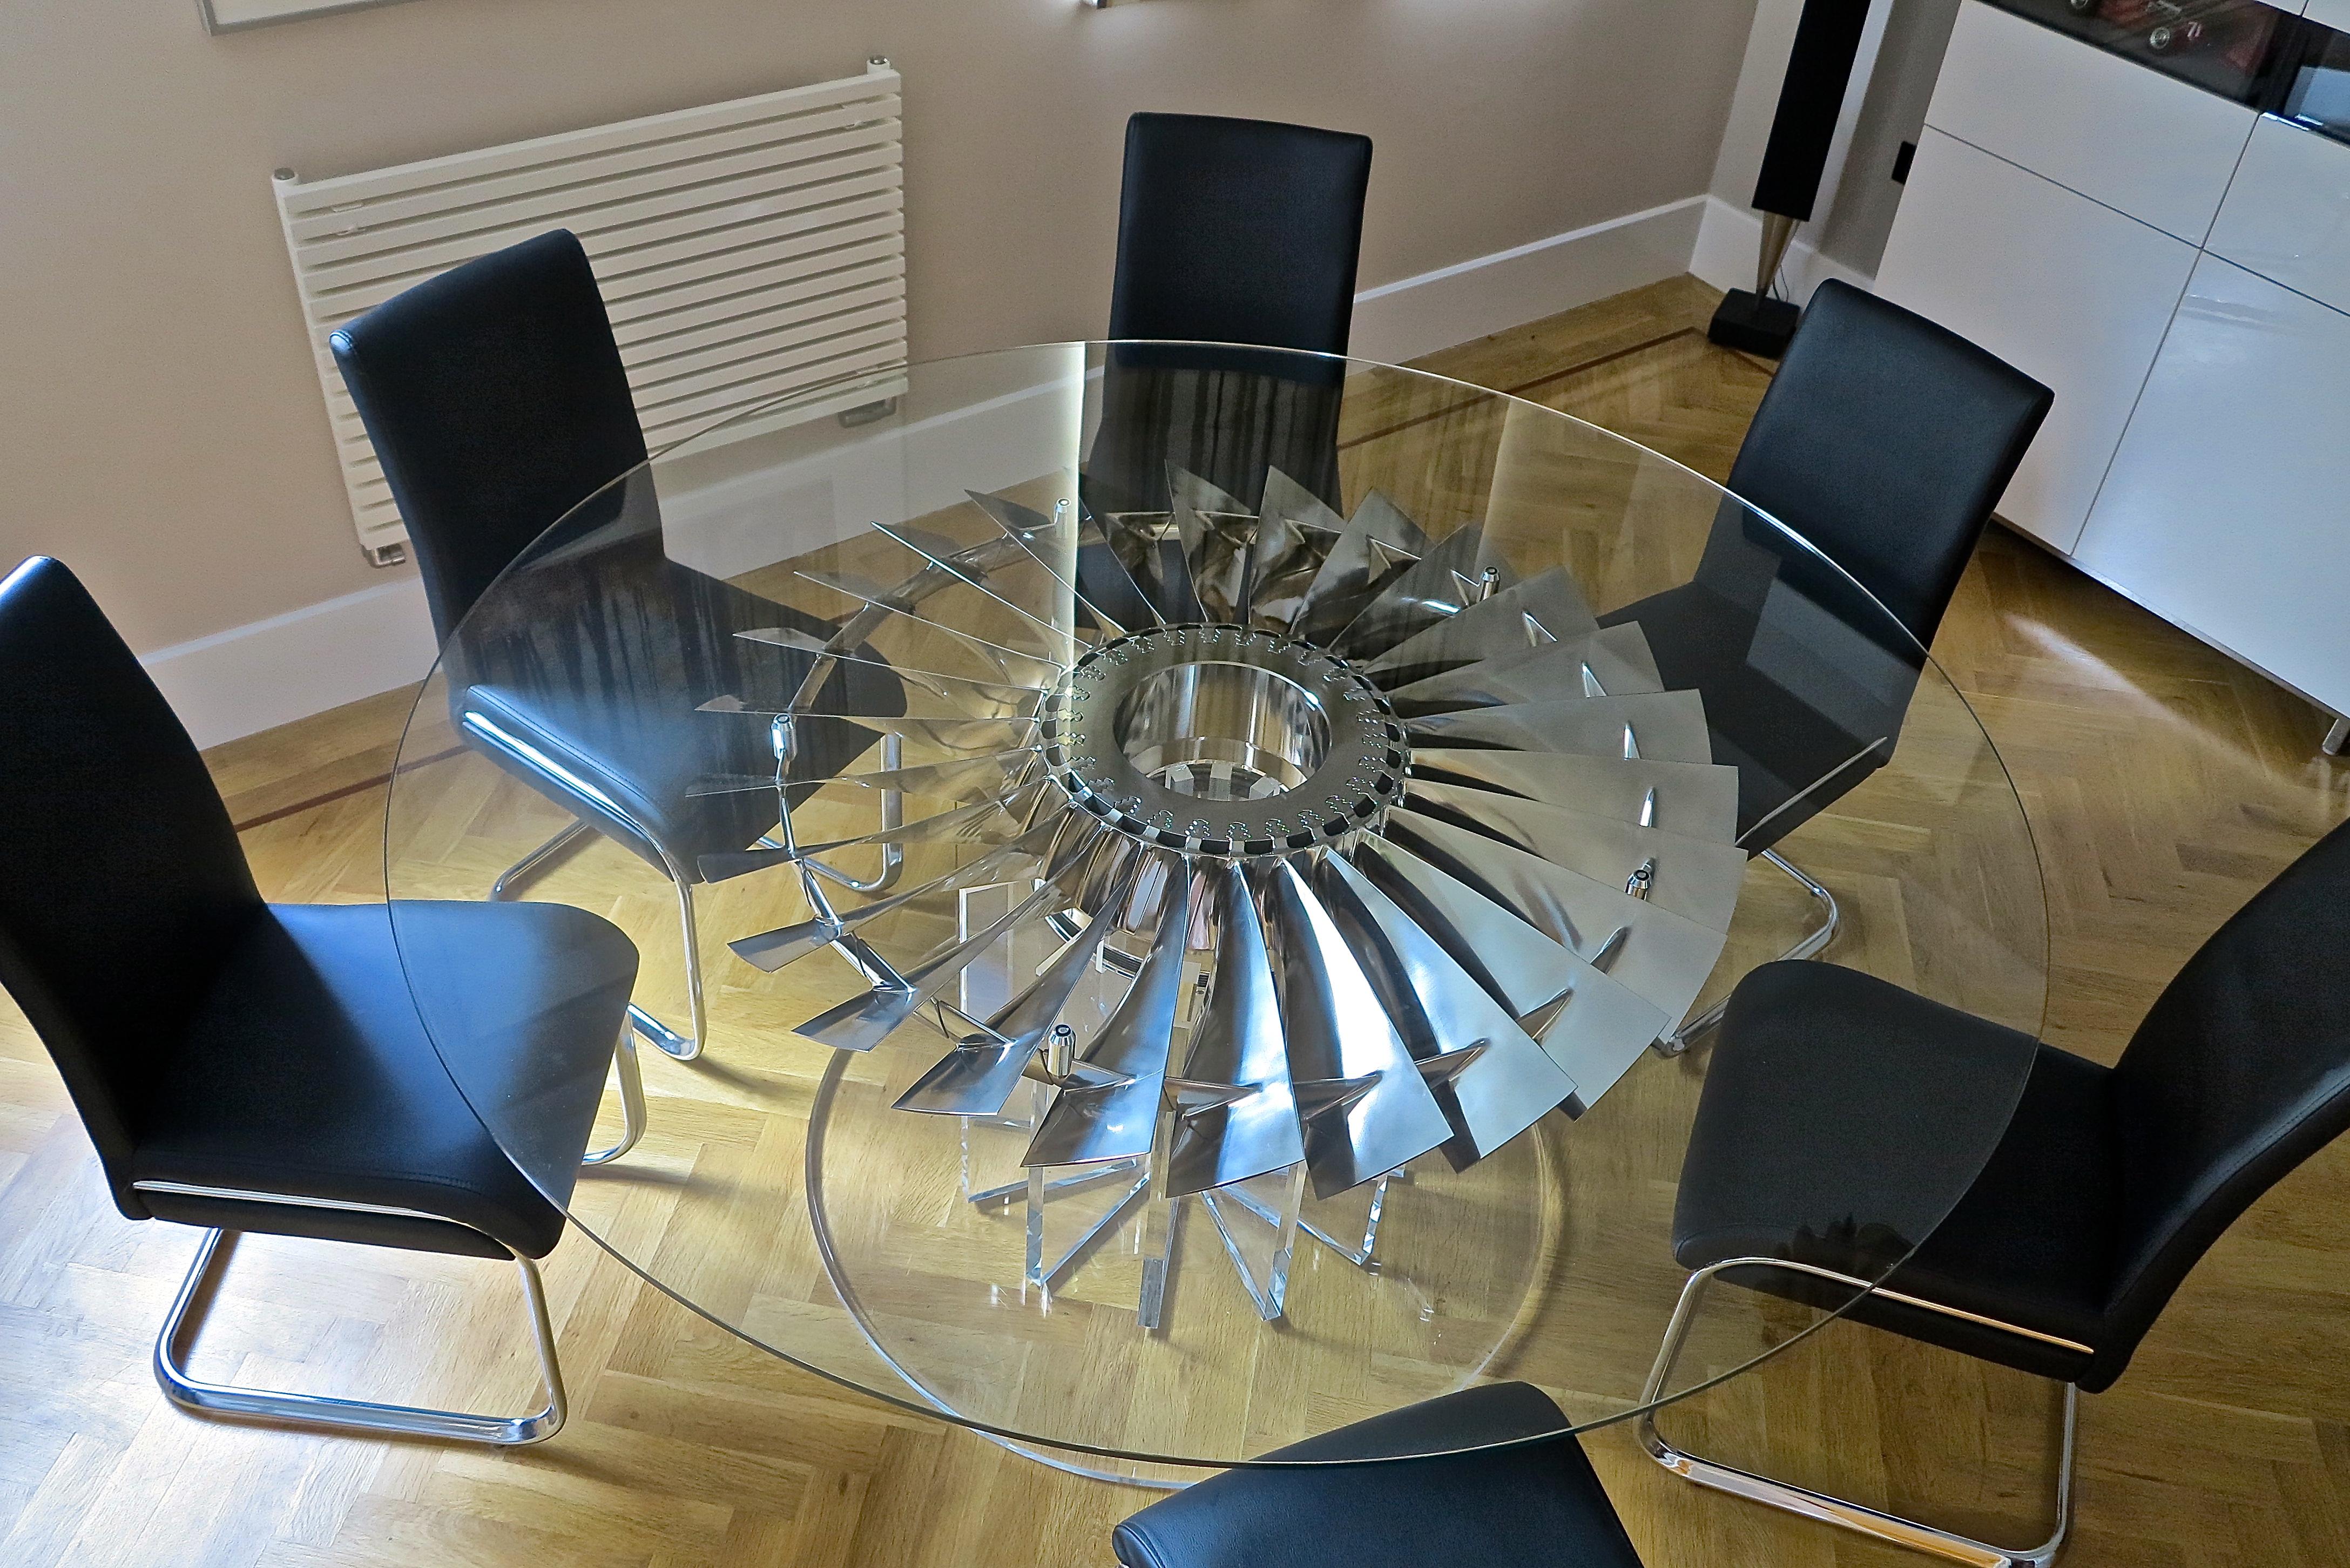 Rolls Royce Sea Harrier Jump Jet Dining / Centre Table In Excellent Condition For Sale In Luton, GB